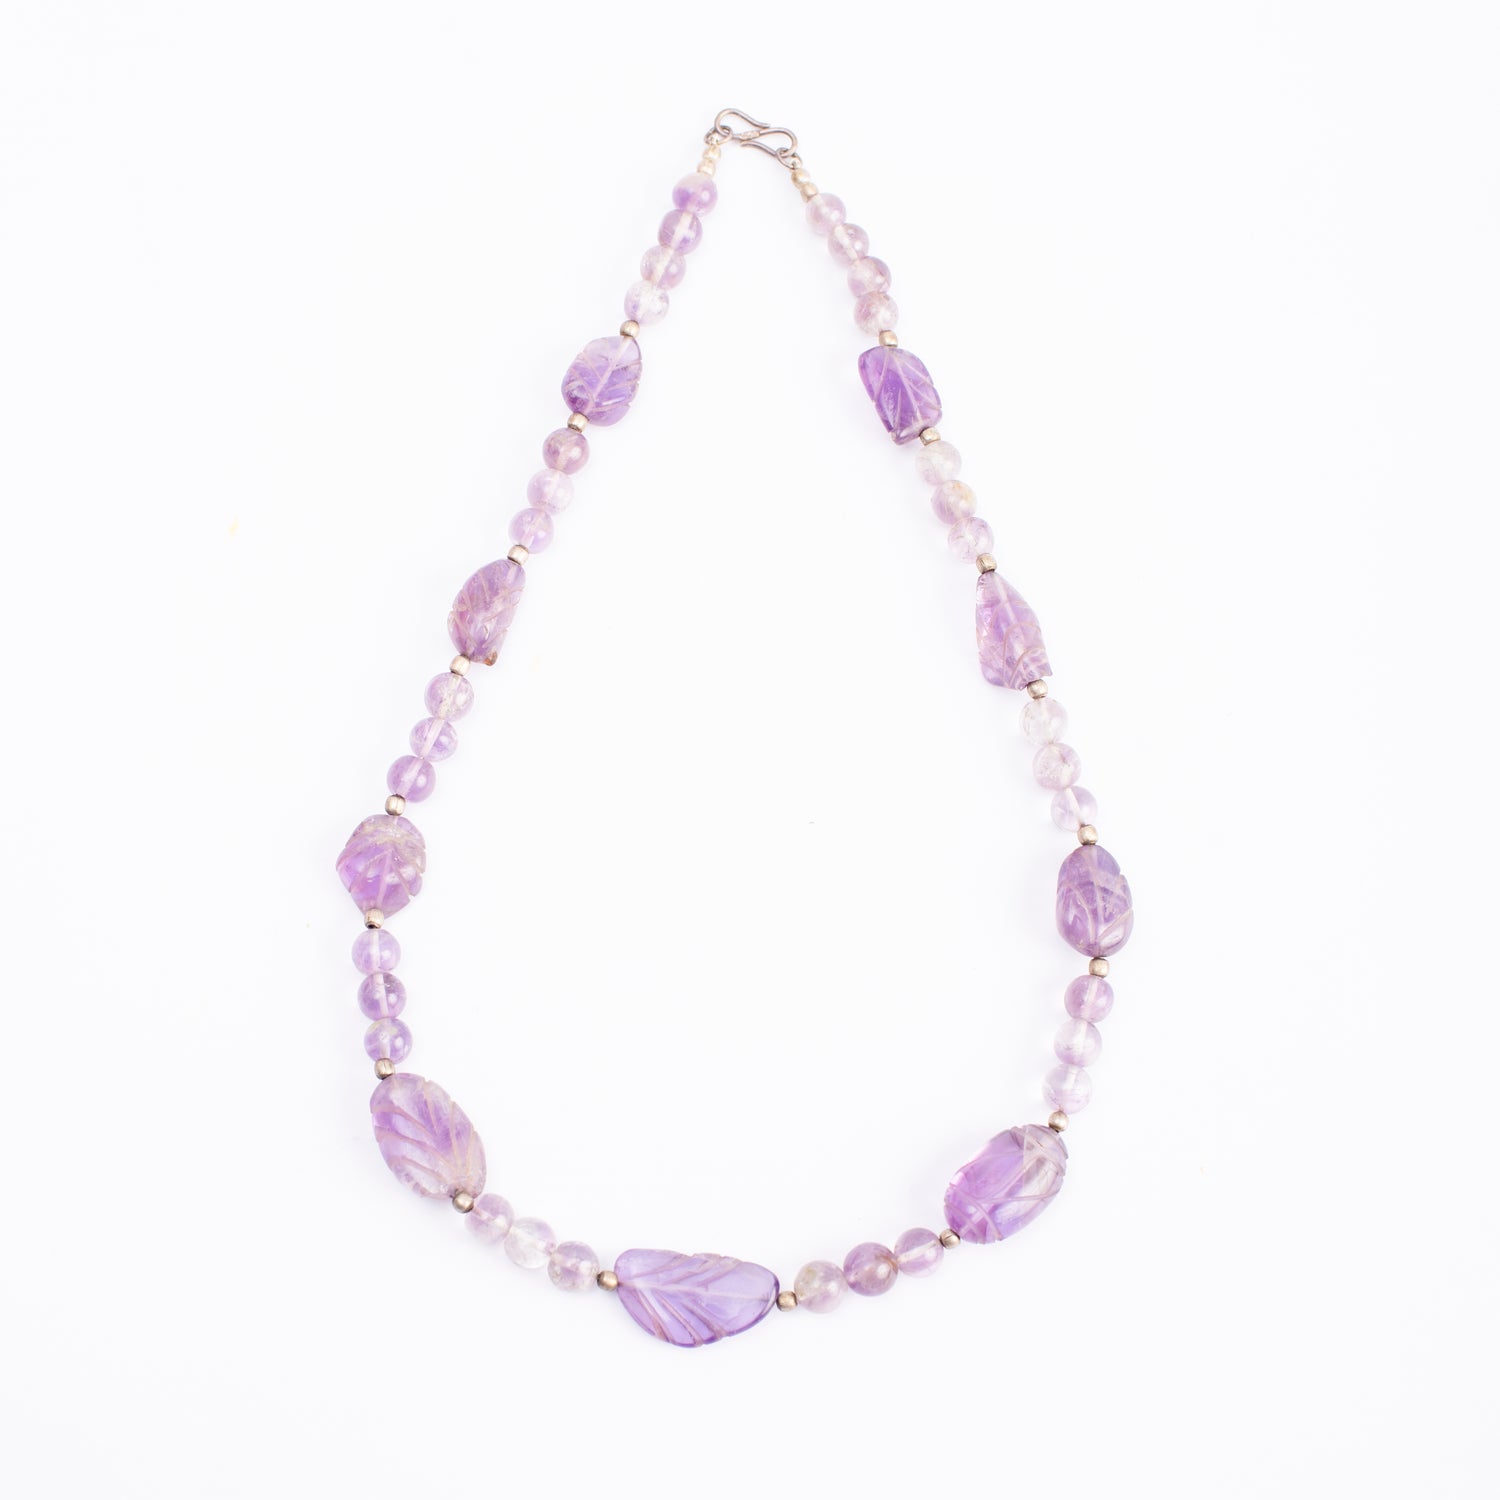 Amethyst Leaf Shaped with Metal Beads Necklace